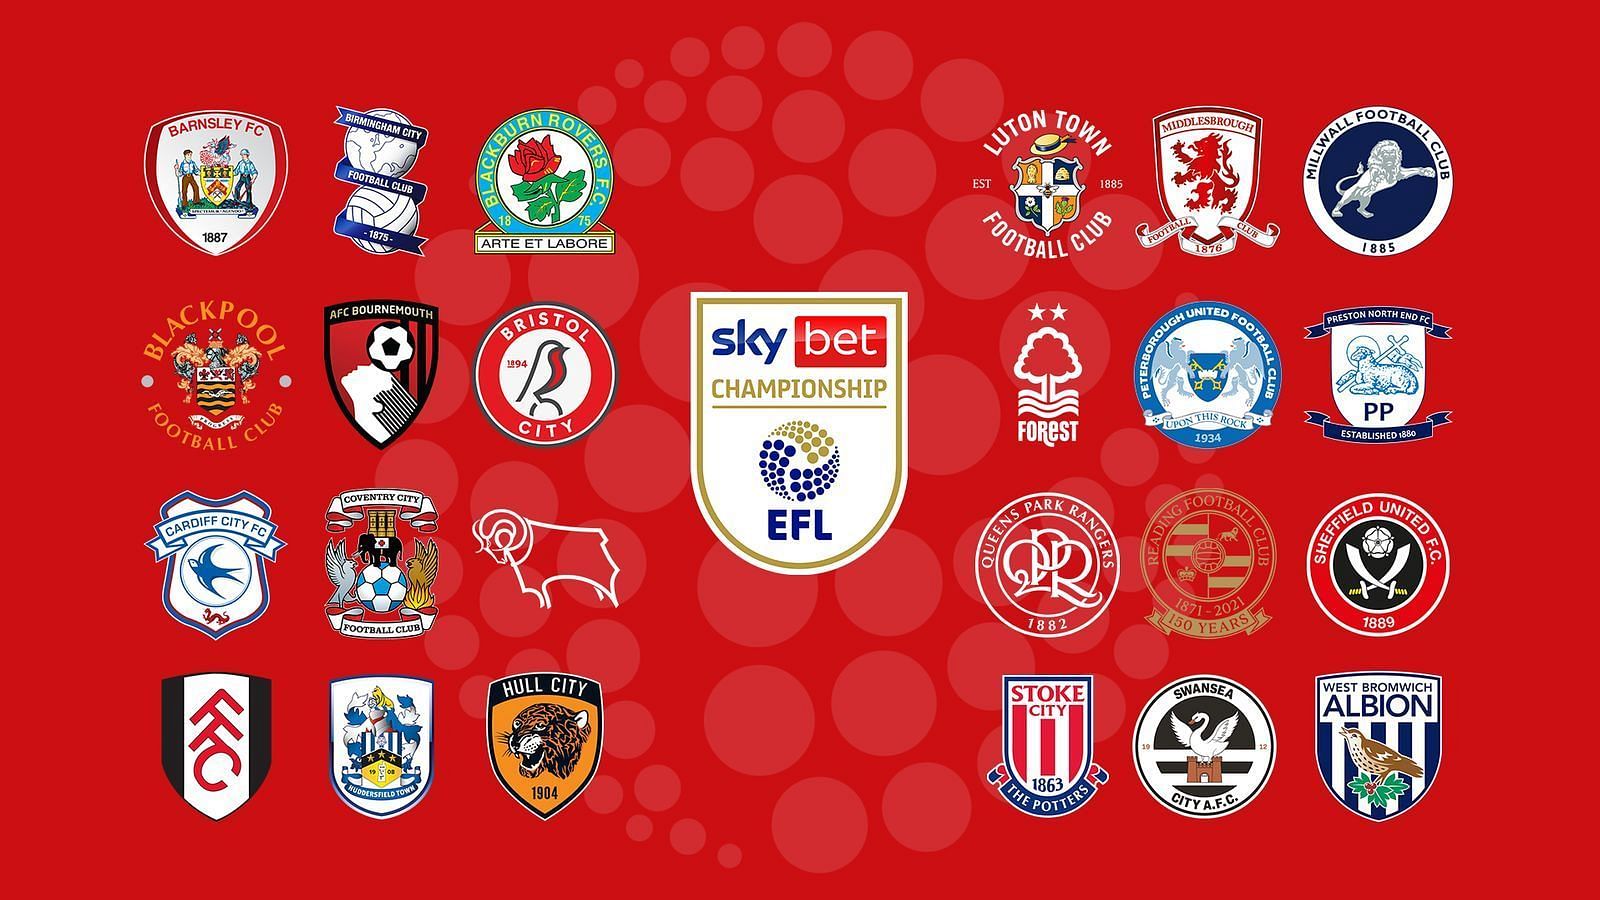 EFL Championship is headed for a thrilling finale.